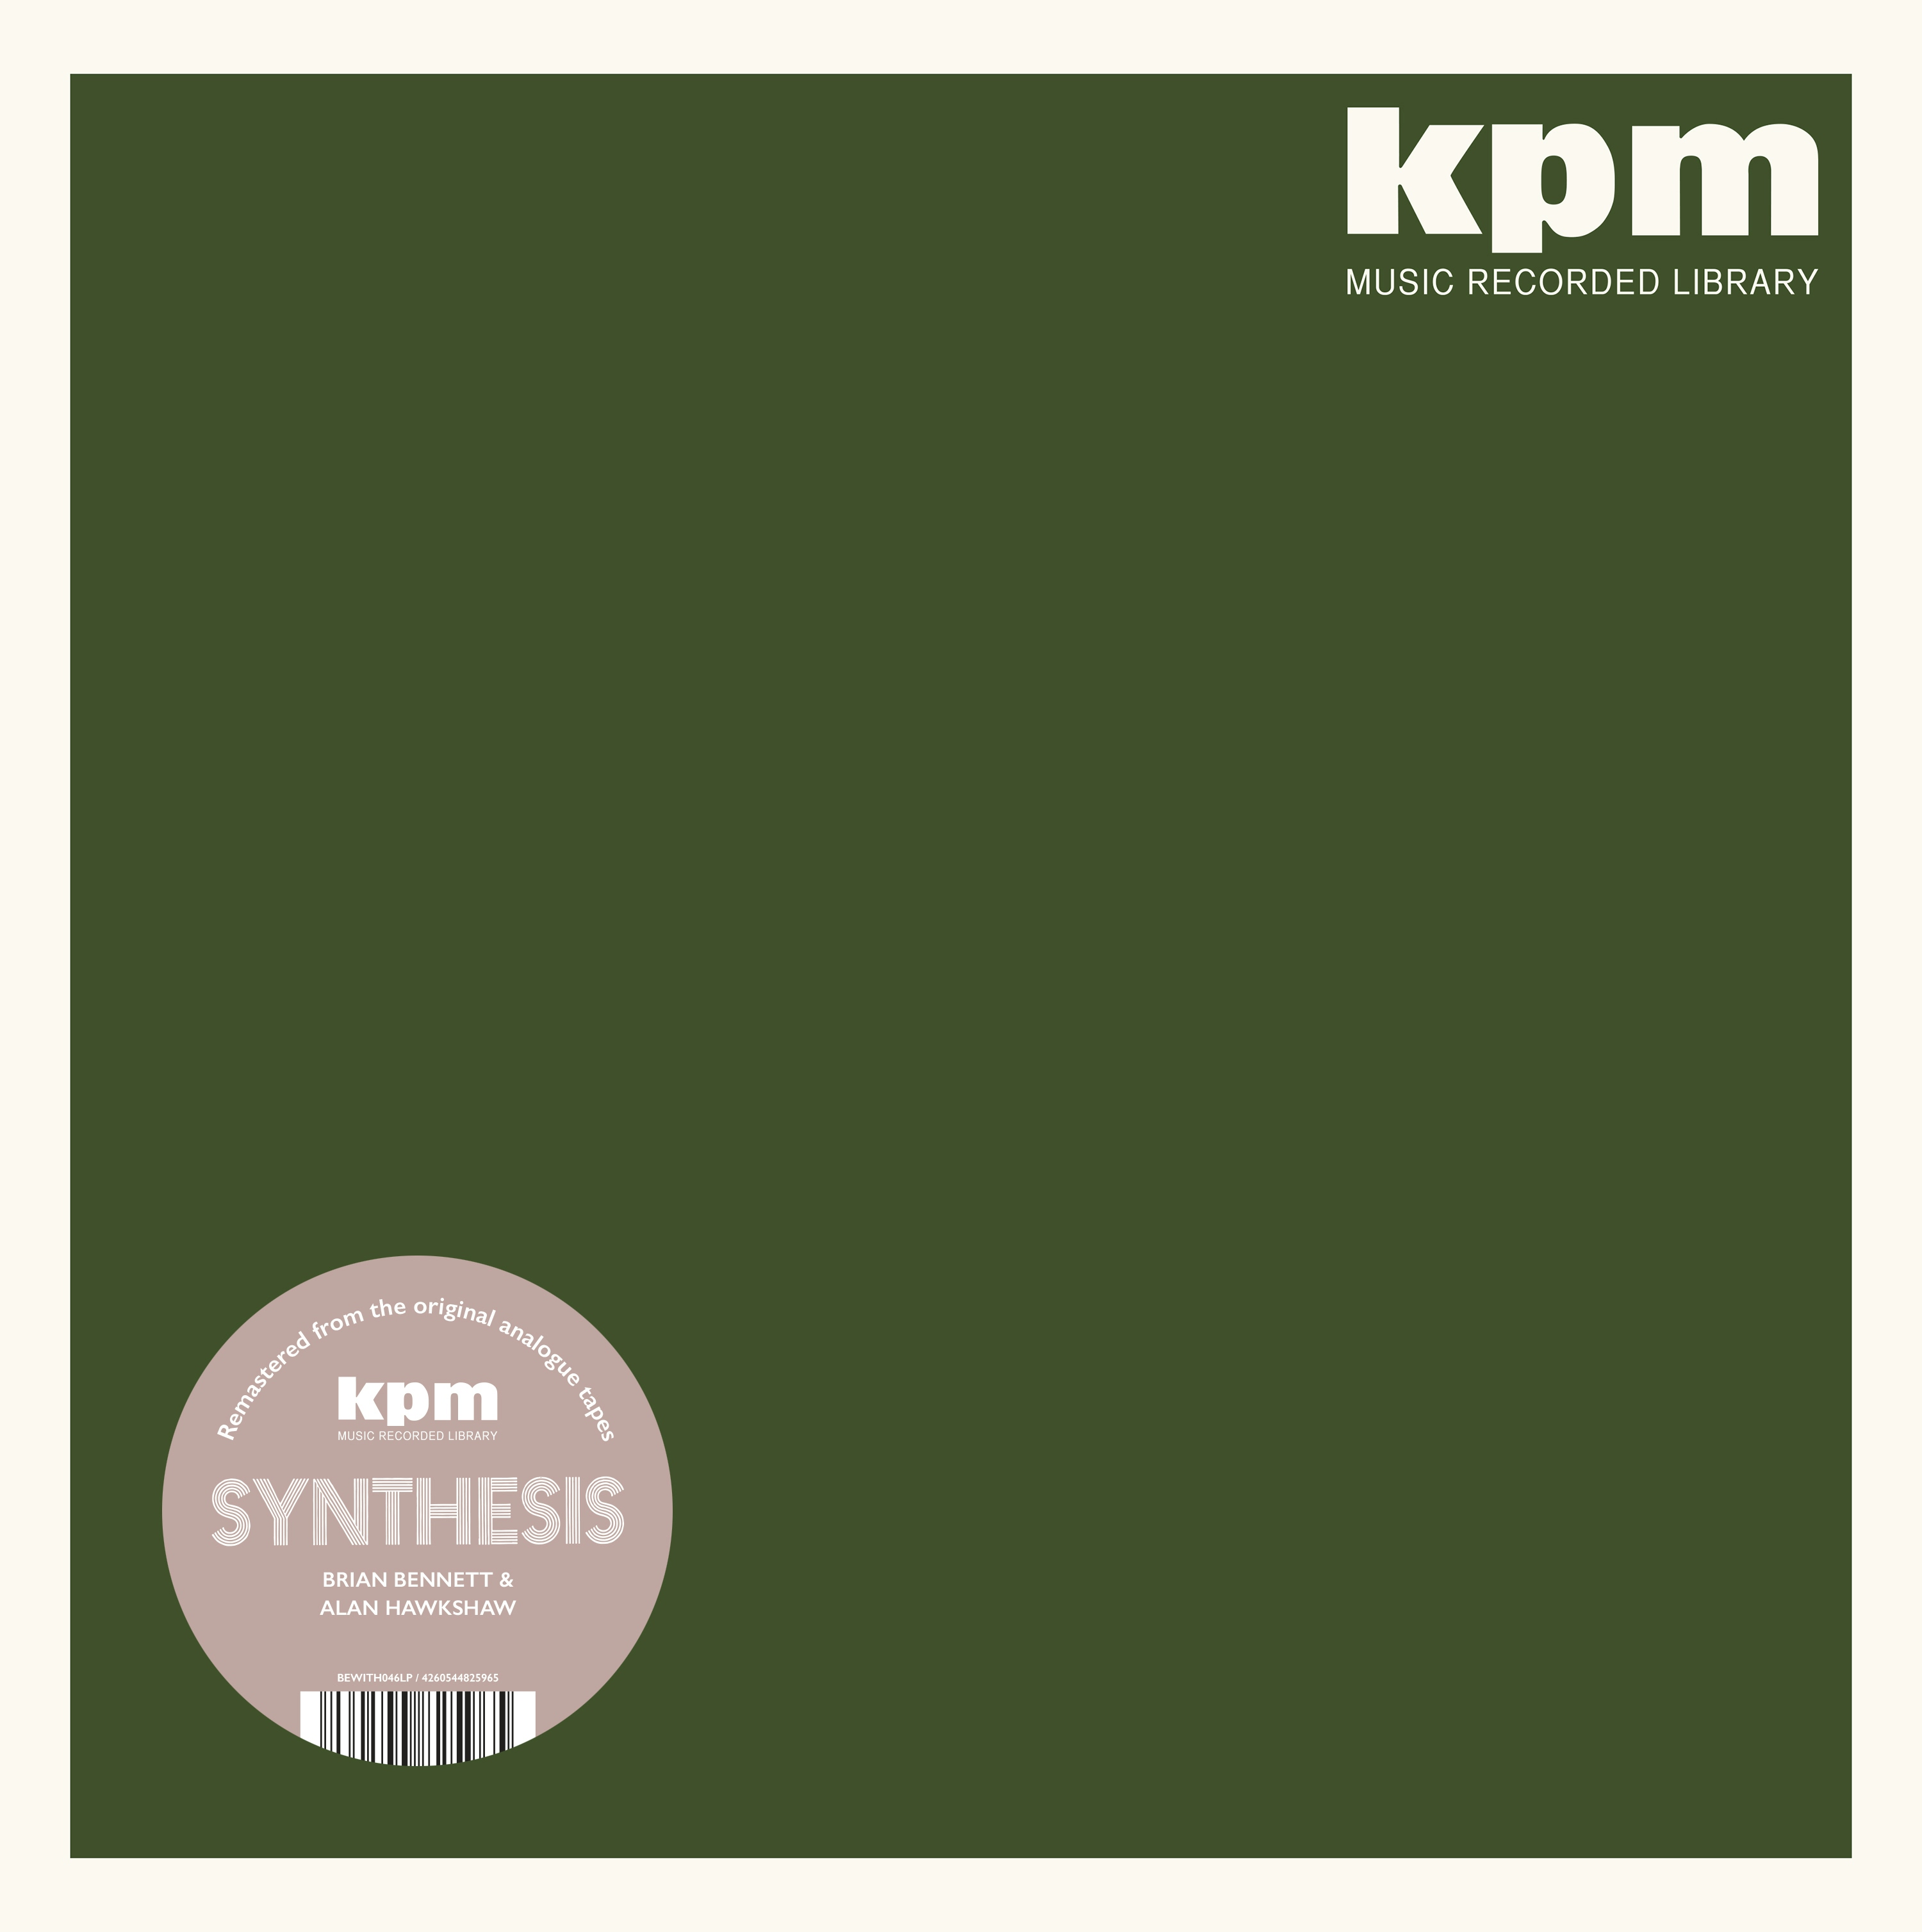 Album artwork for Album artwork for Synthesis (The KPM Reissues) by Alan Hawkshaw and Brian Bennett by Synthesis (The KPM Reissues) - Alan Hawkshaw and Brian Bennett